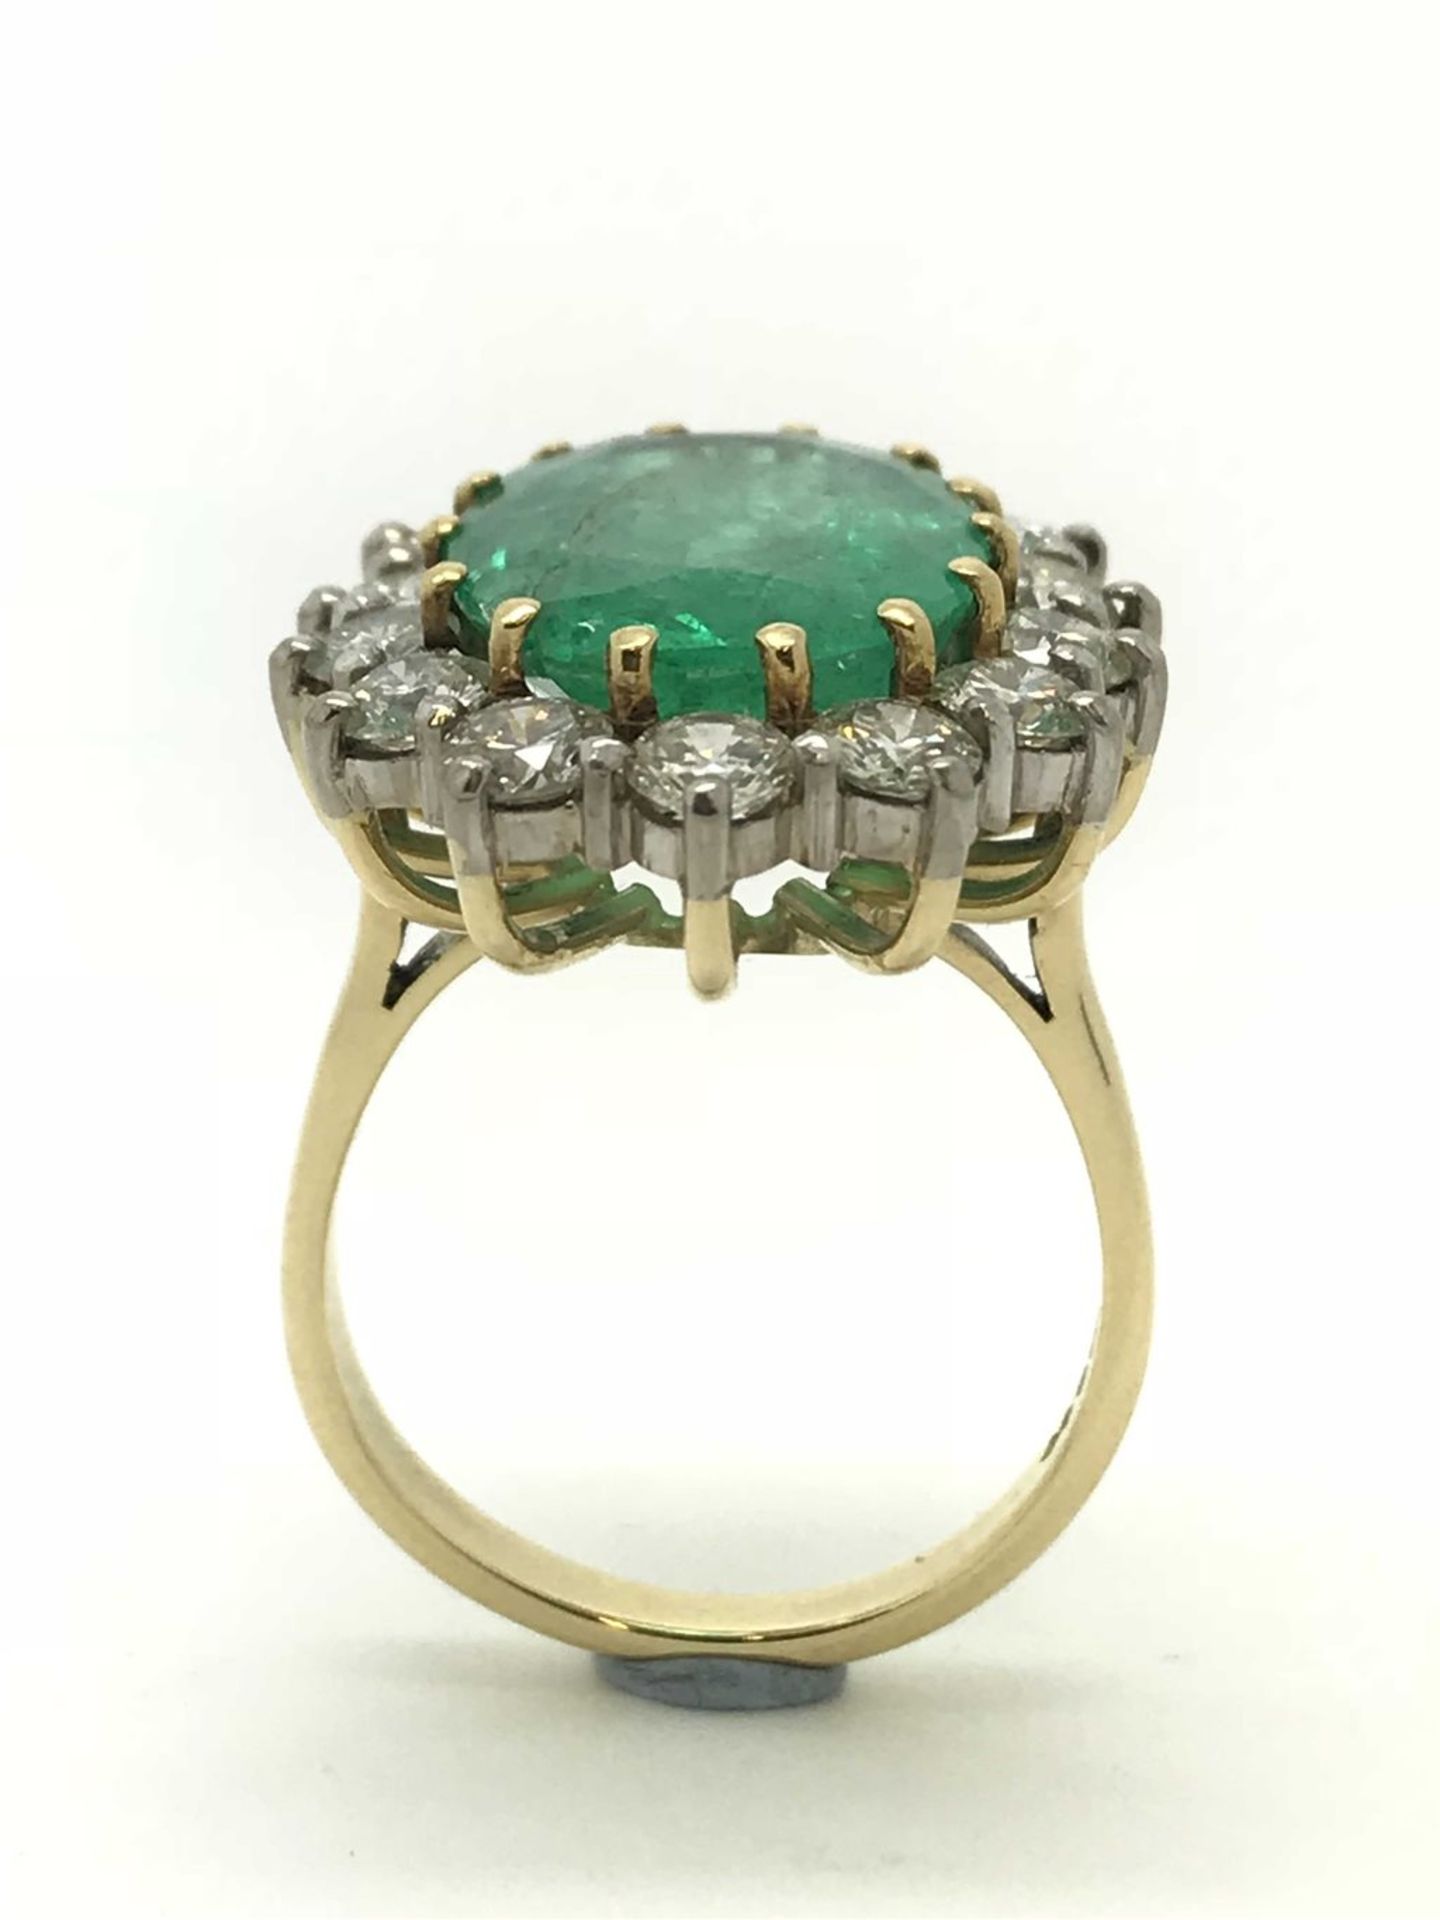 Emerald (6.93ct) & Diamond (2.10ct) Large Cluster Ring - 18ct - Image 4 of 4